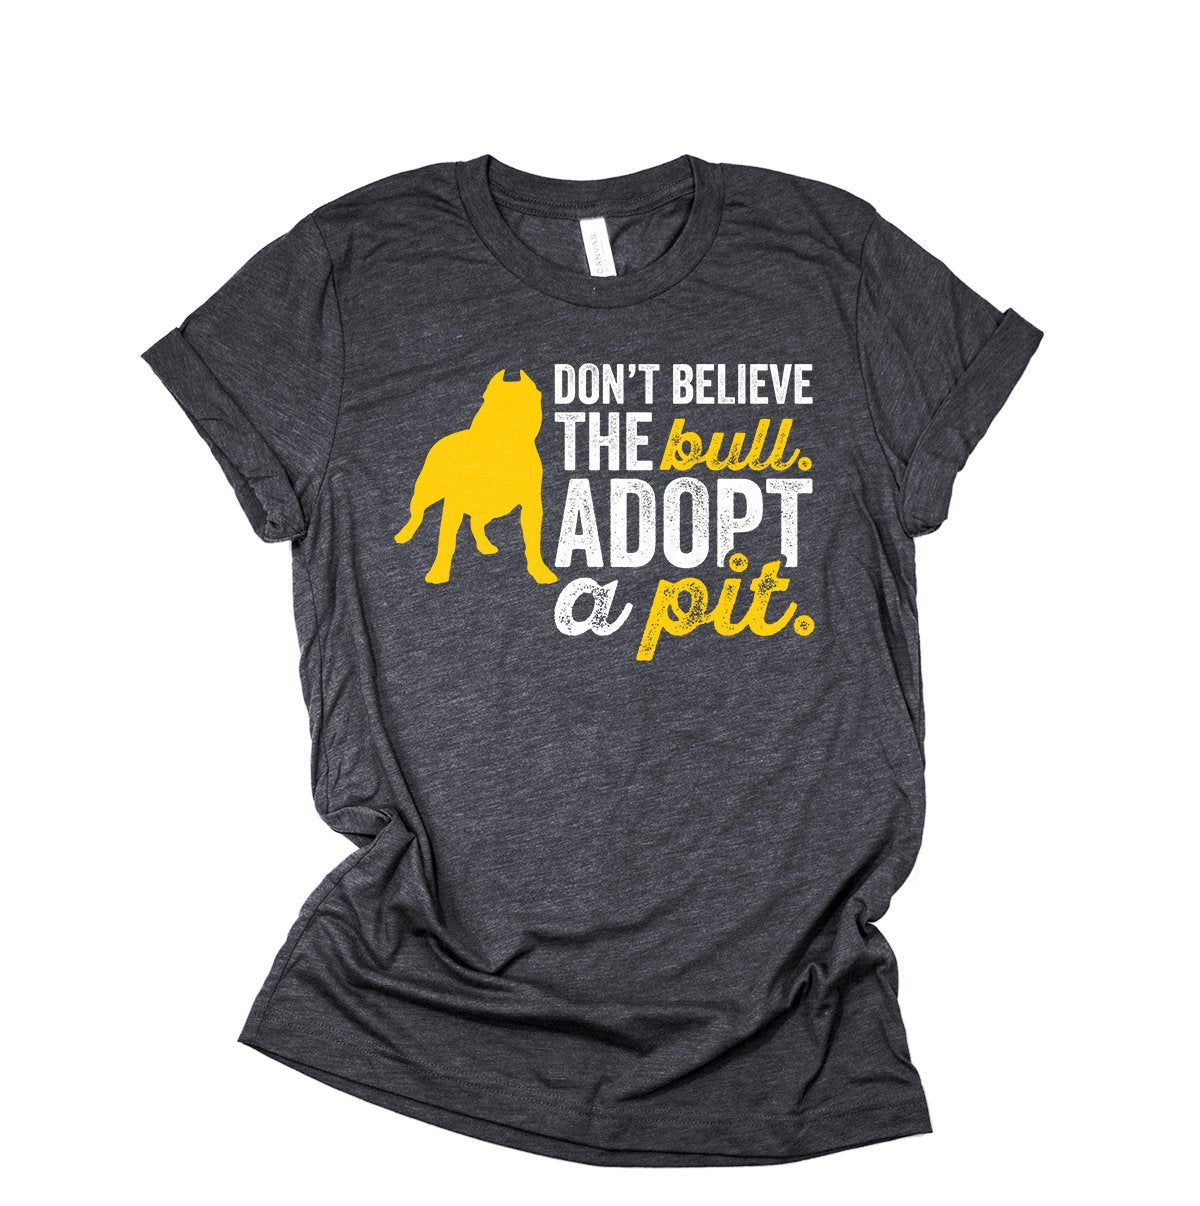 Pit Bull Rescue T-Shirts & T-Shirt Designs